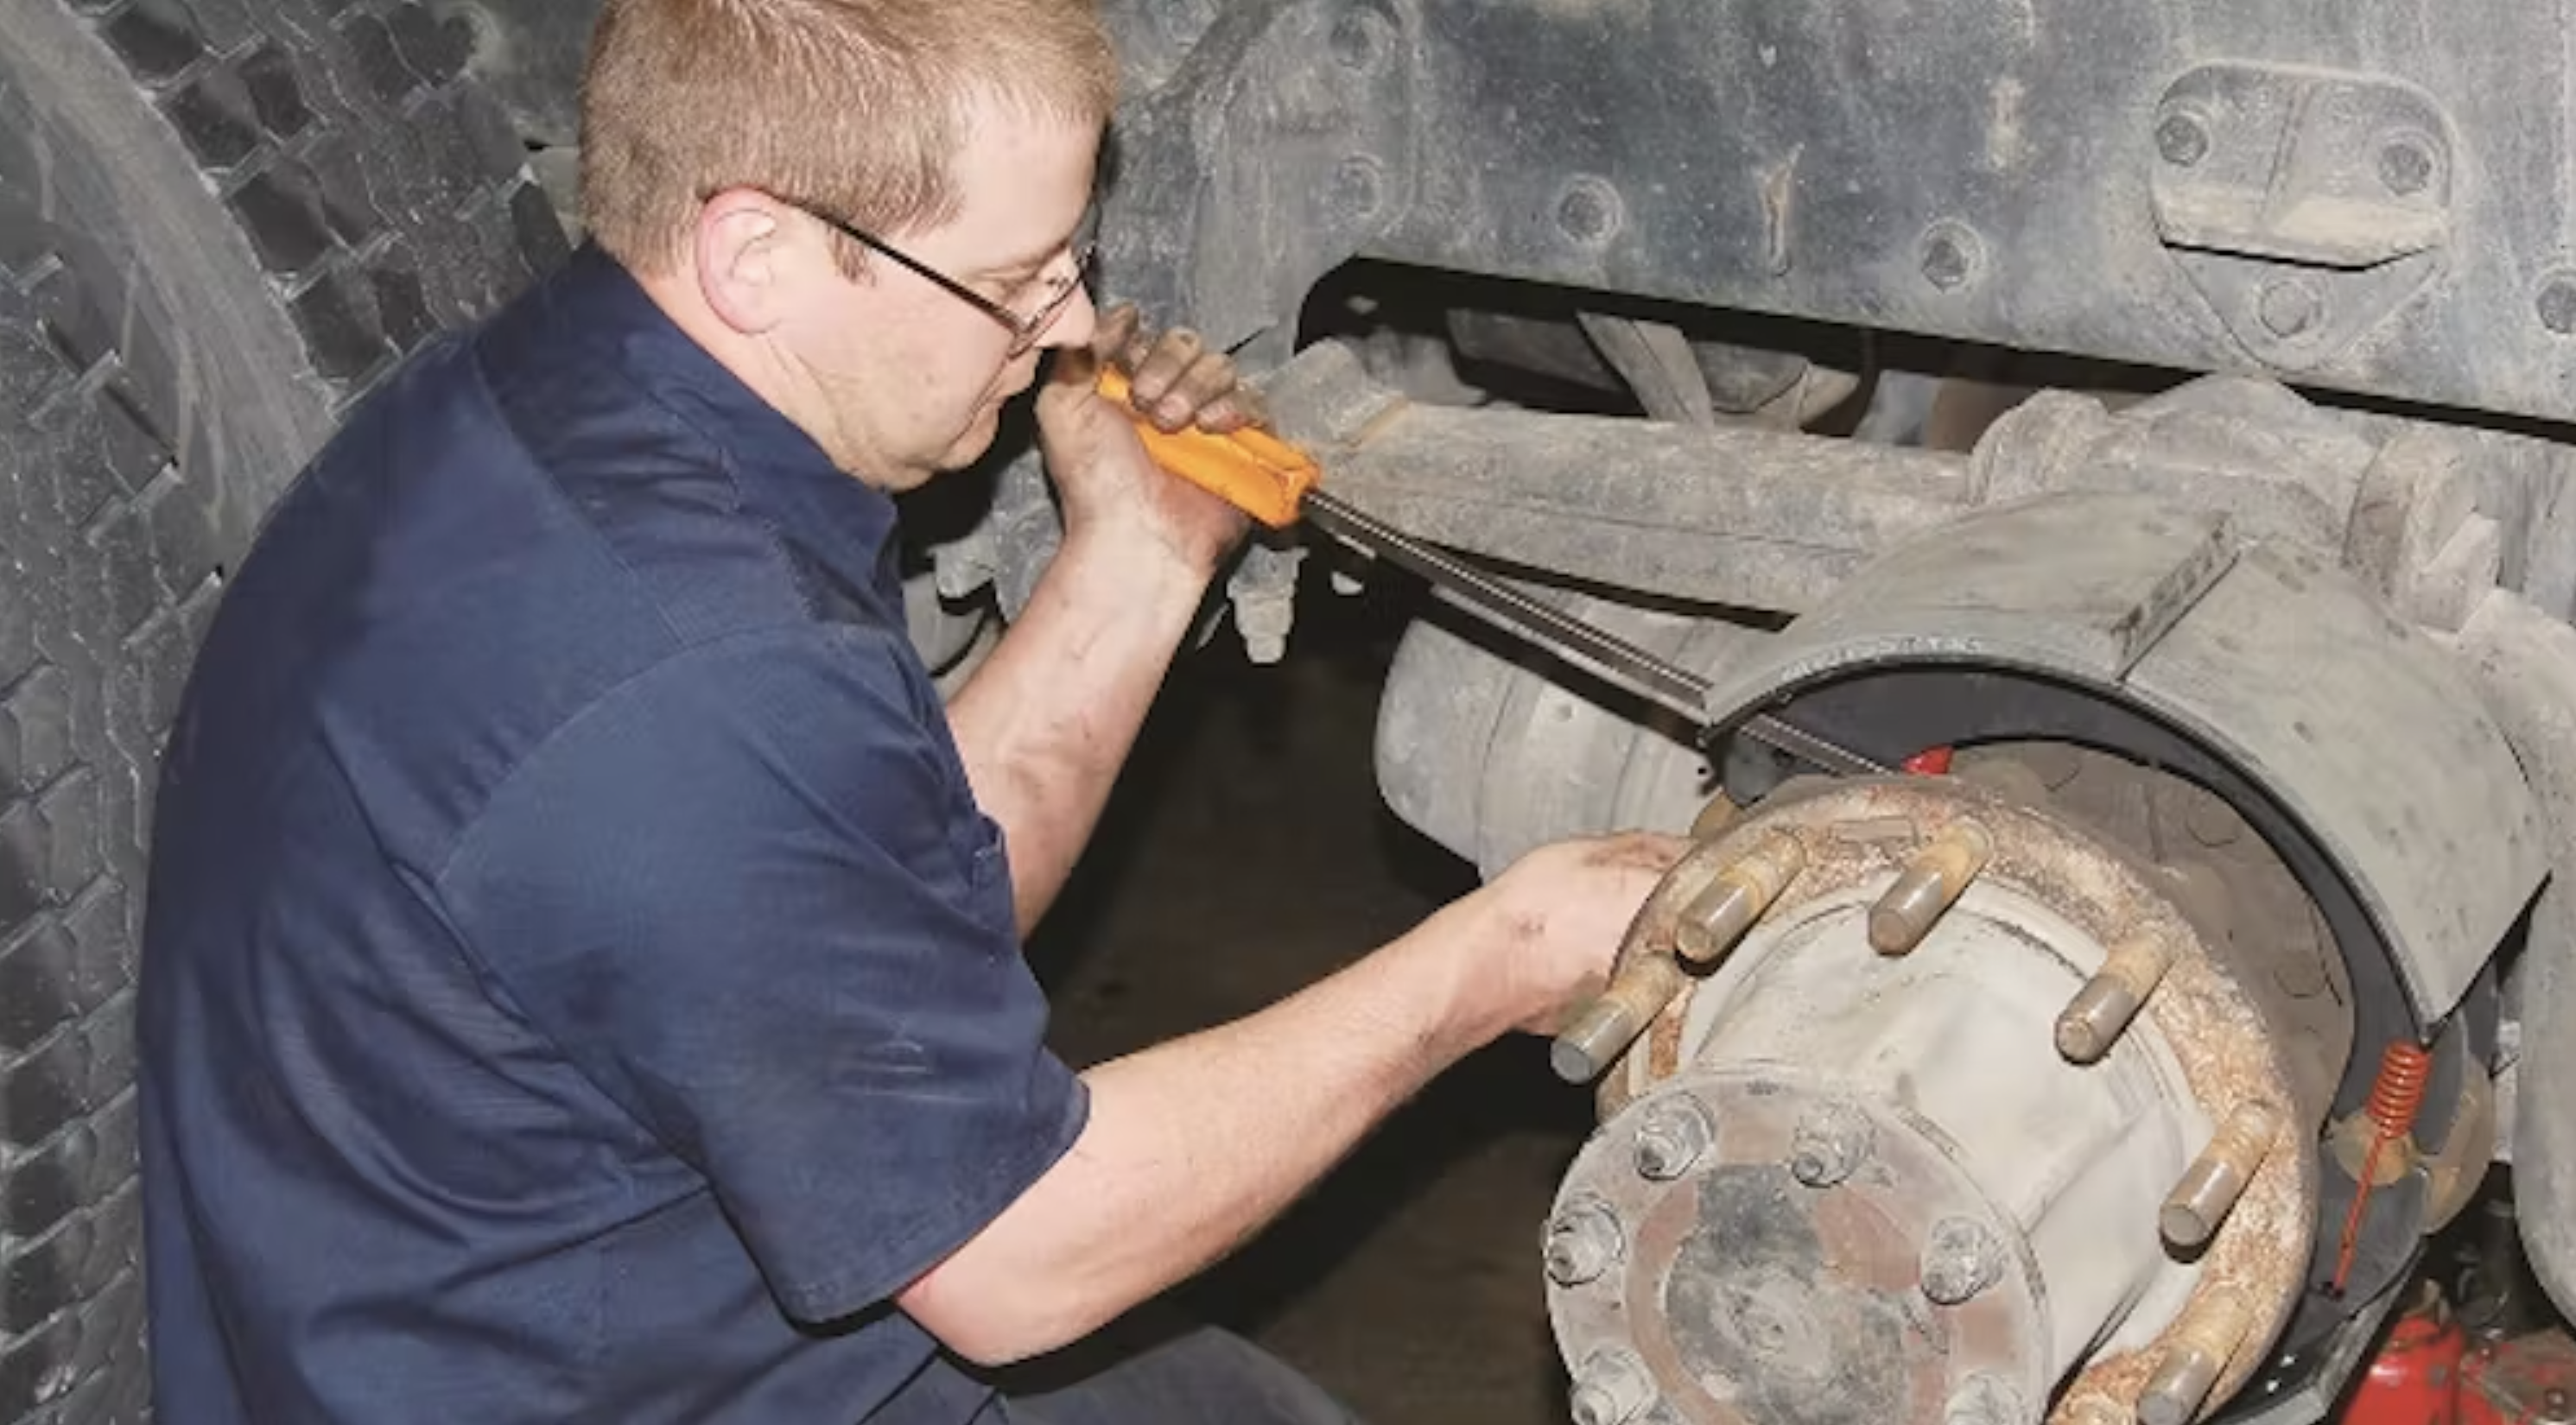 this image shows truck brake service in Toledo, OH